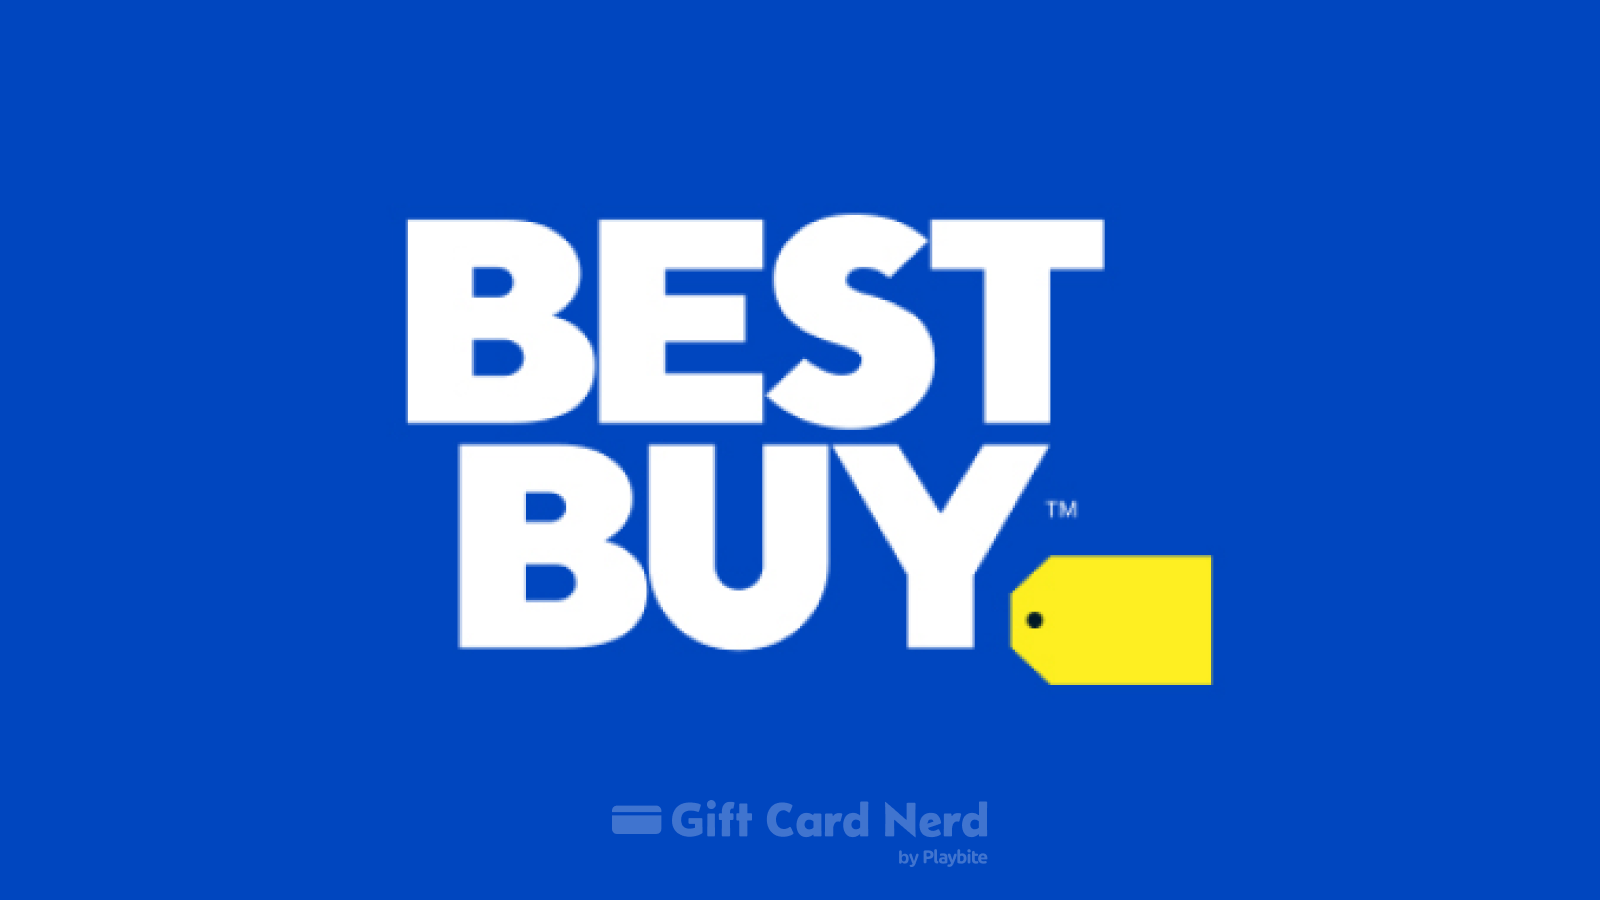 Can I Use a Best Buy Gift Card on Venmo?